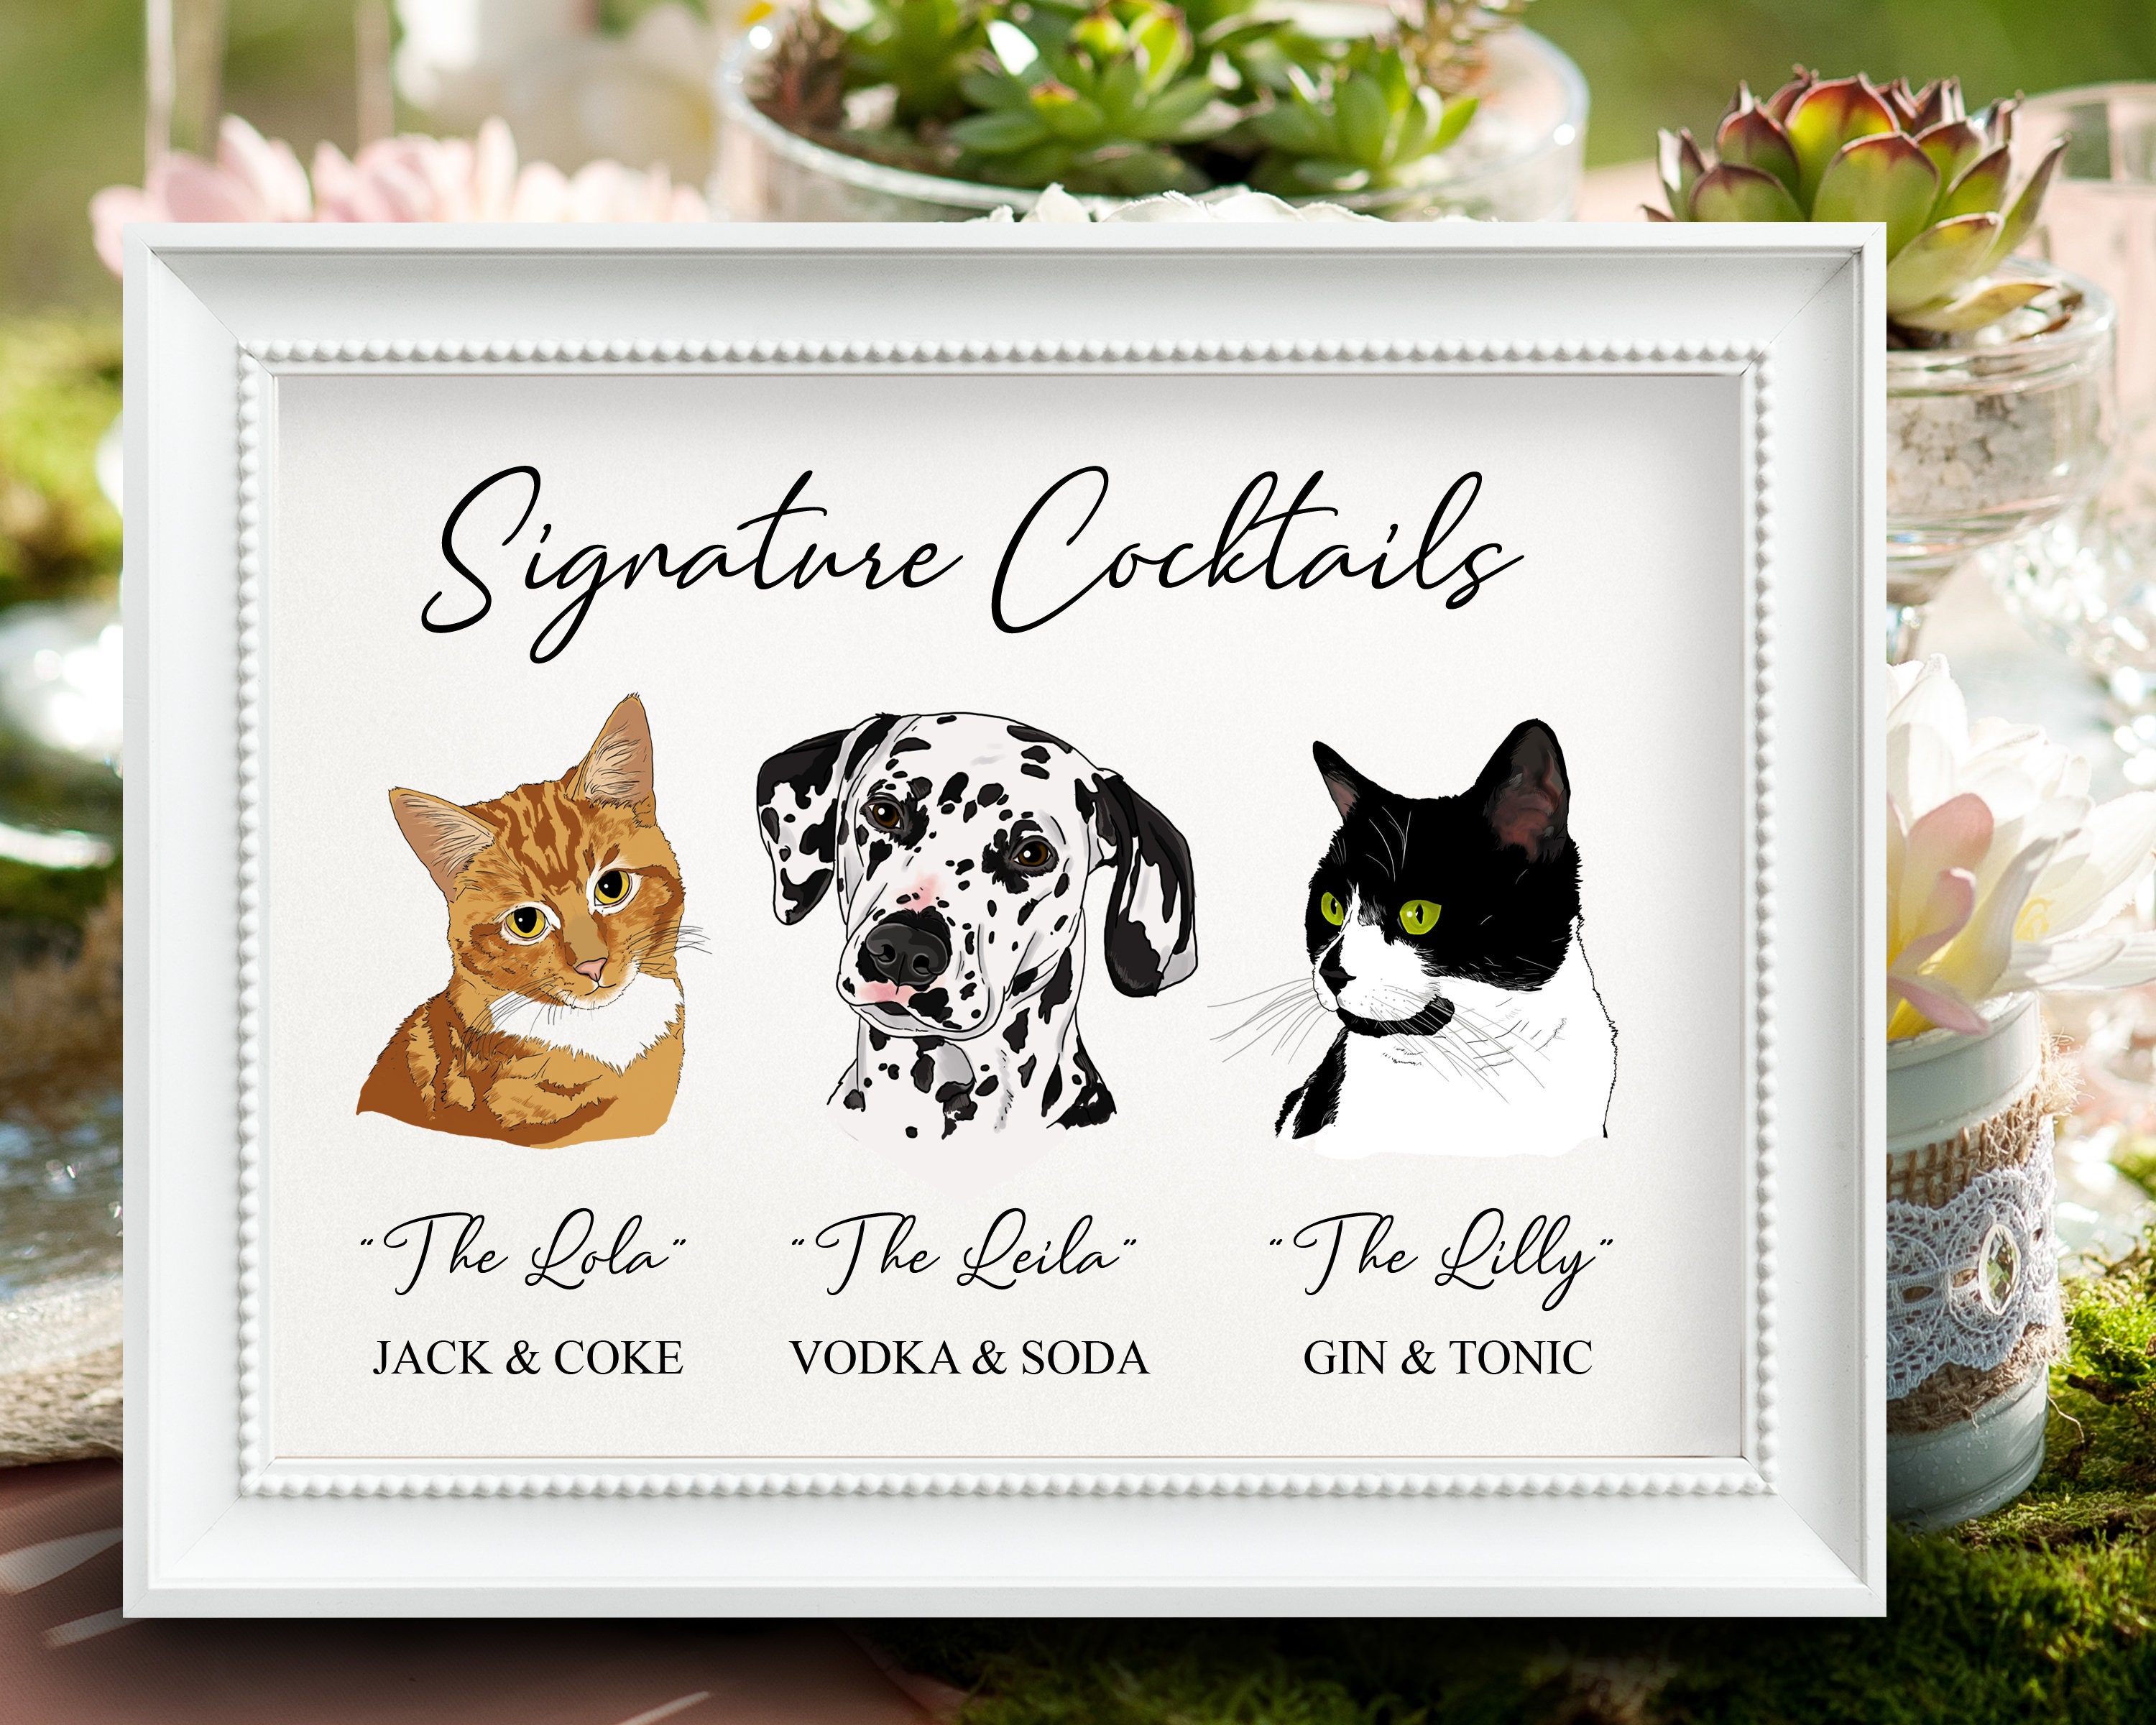 Pet Signature Cocktail Sign Drink Sign with Pet Digital Signature Drinks Sign Pet Pet Signature Drink Sign Wedding Dog Drink Wedding Sign